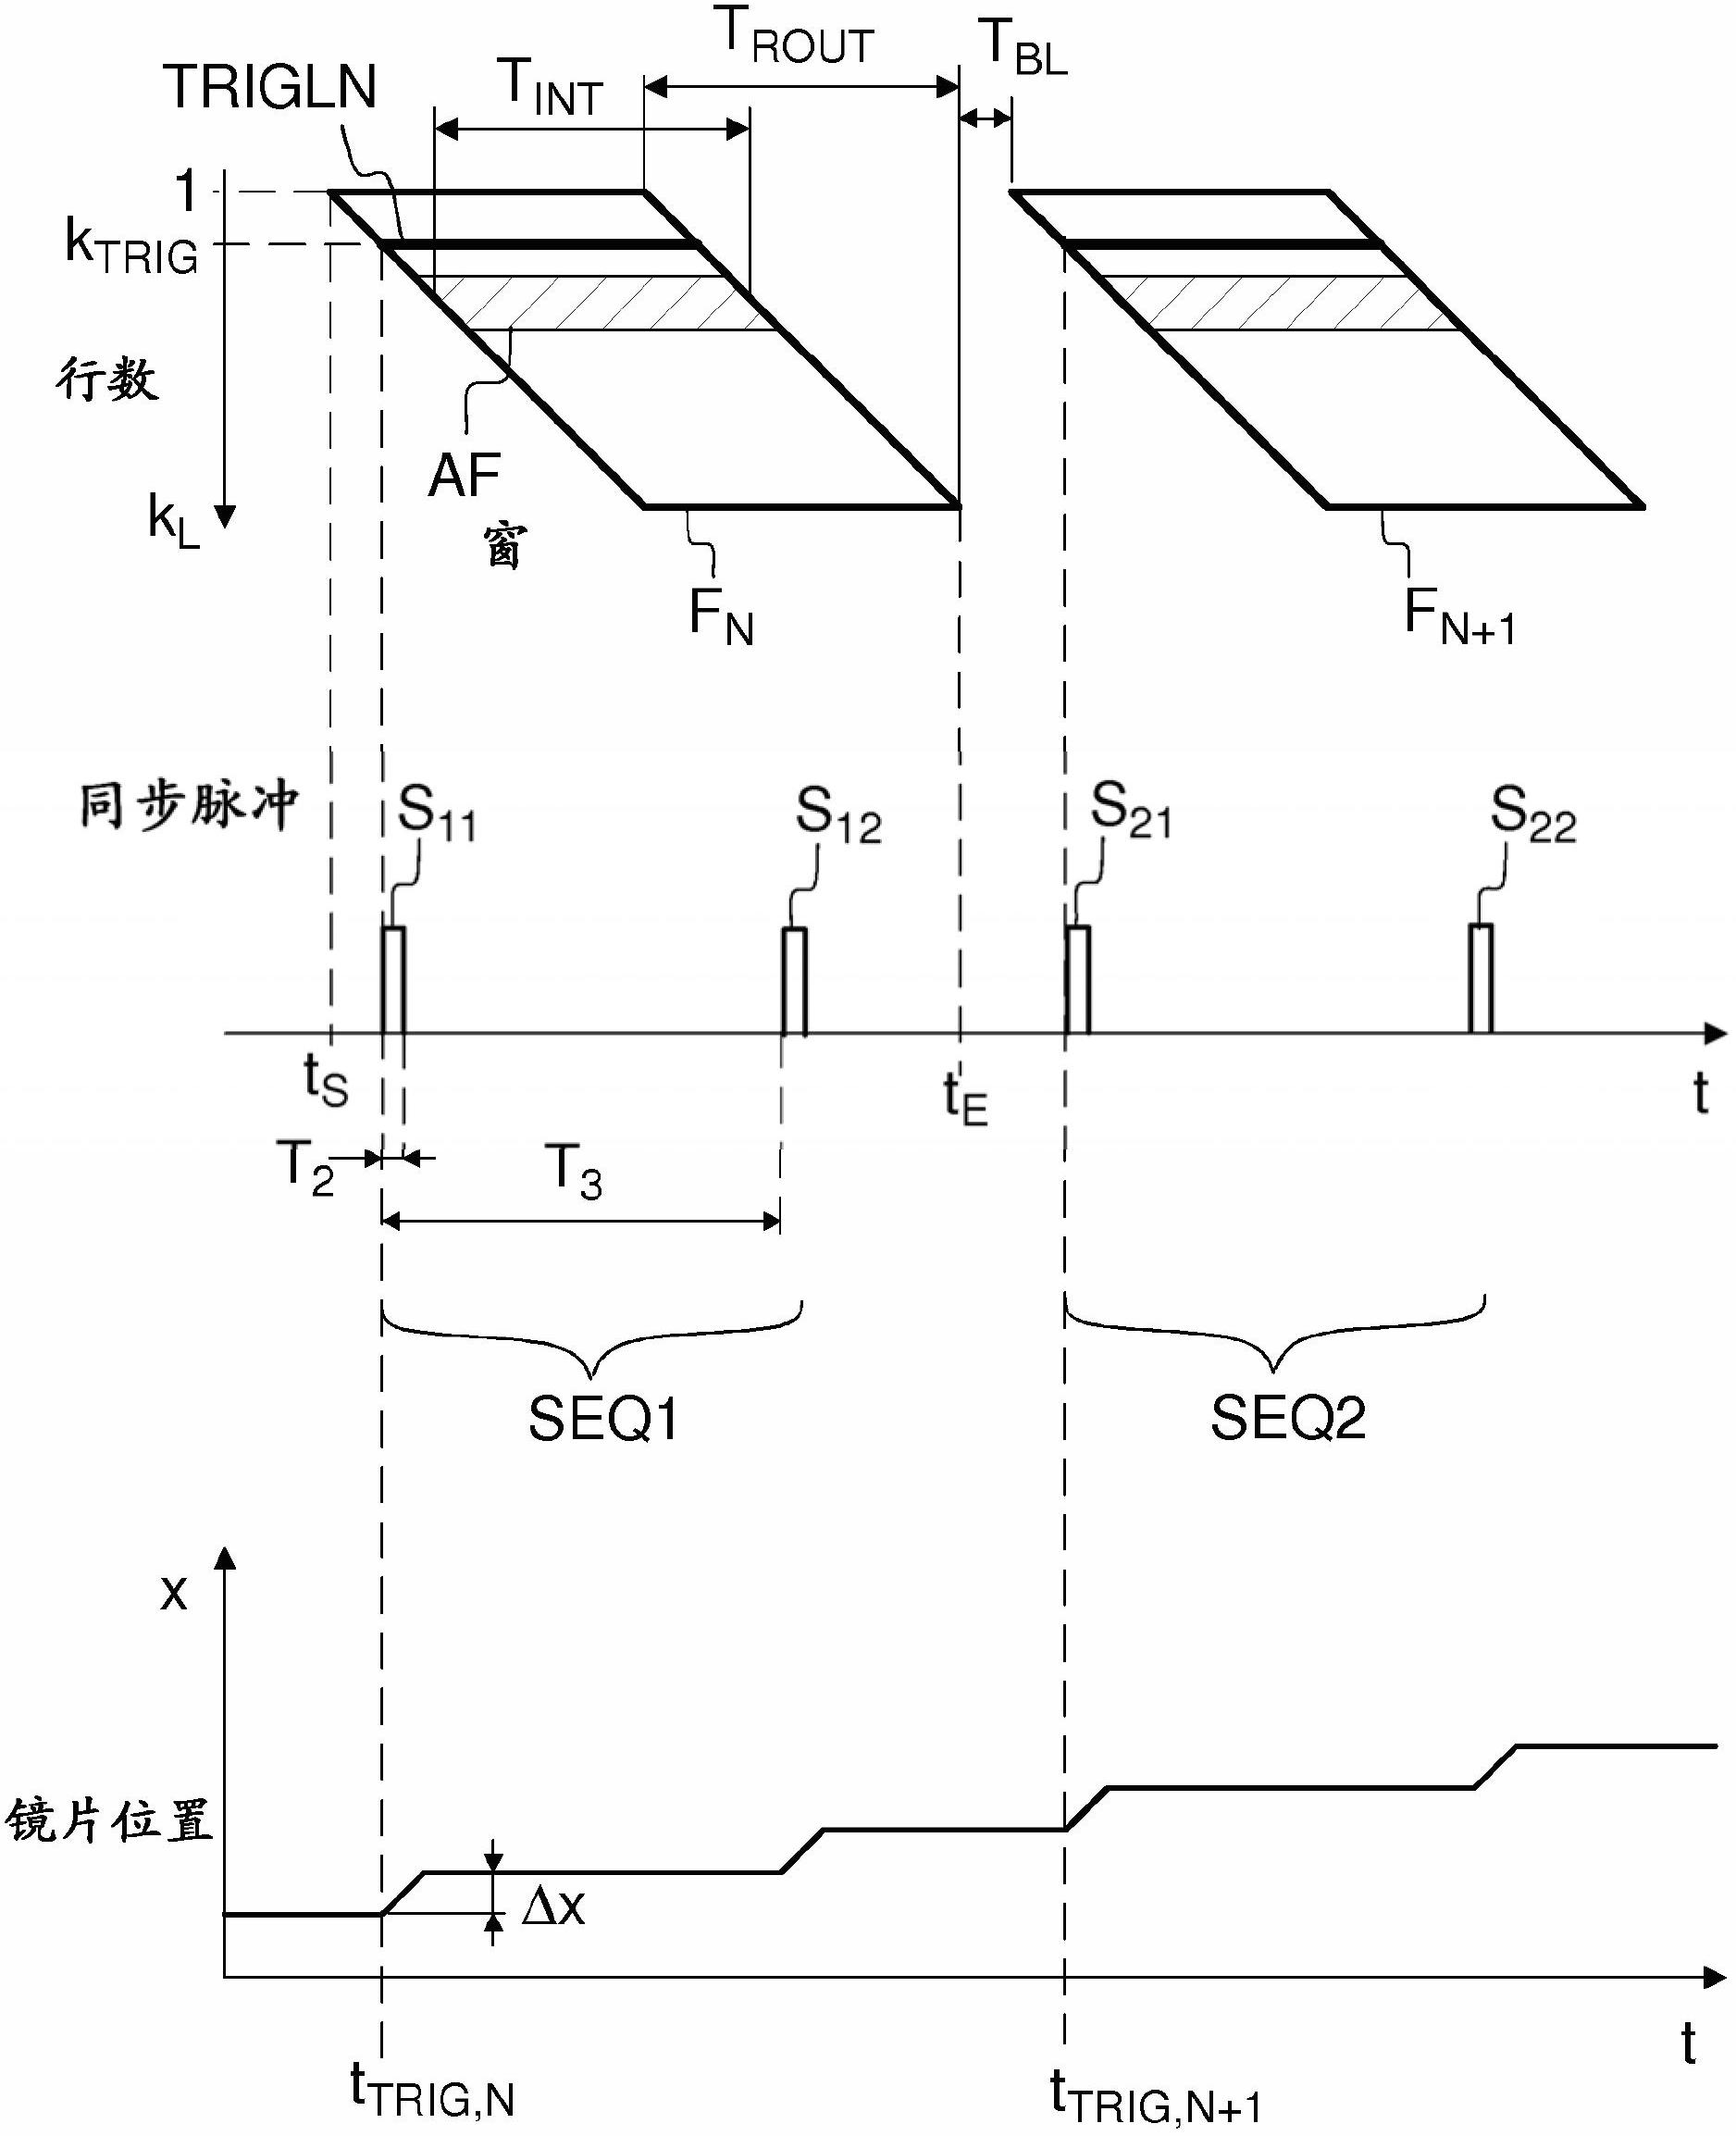 An apparatus, a method, and a computer program product for automatic focusing